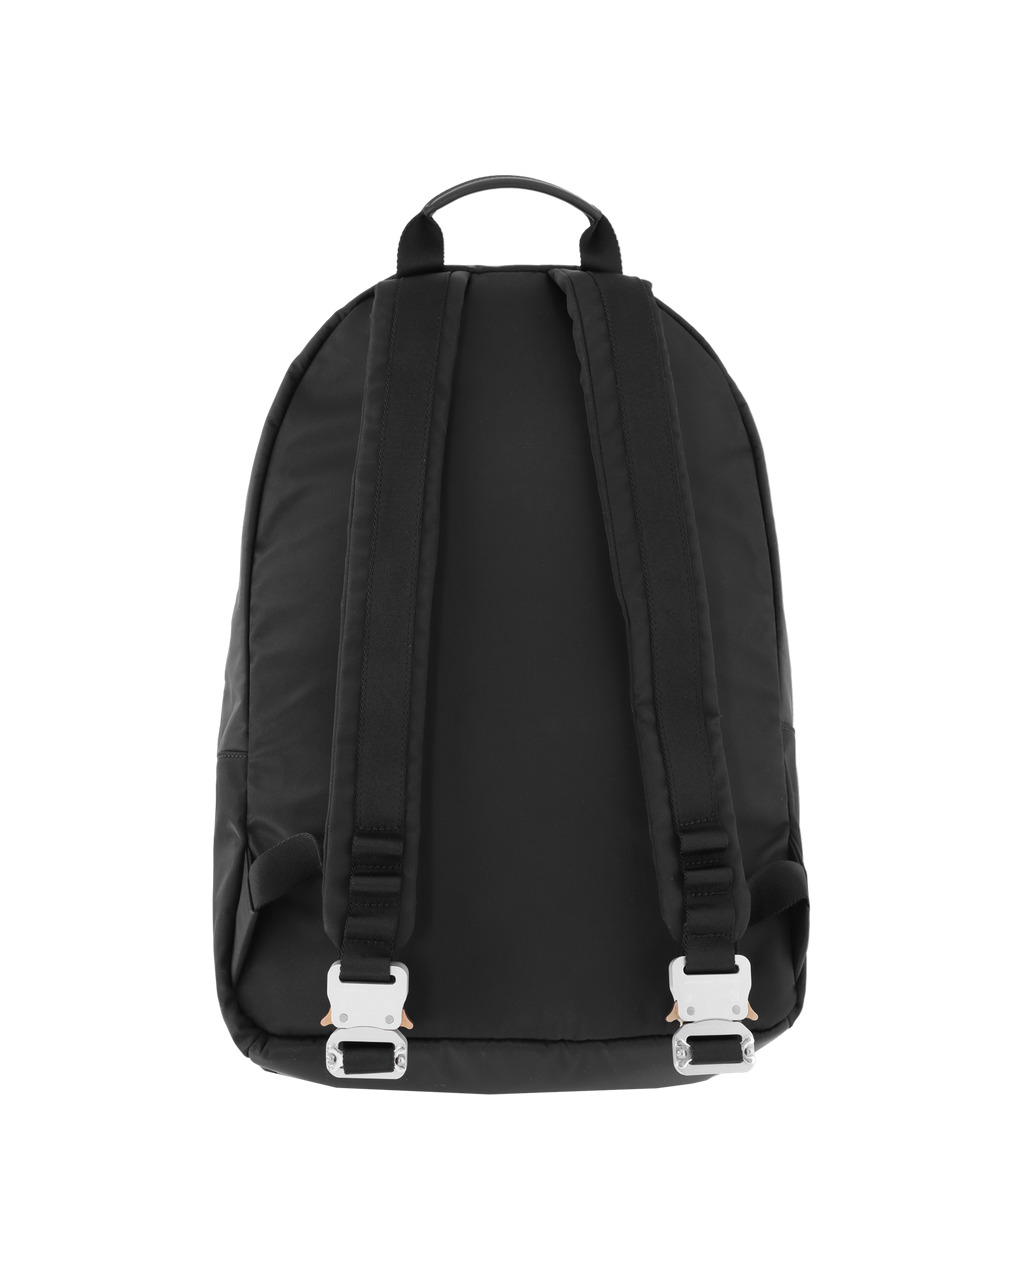 TRICON BACKPACK - 3